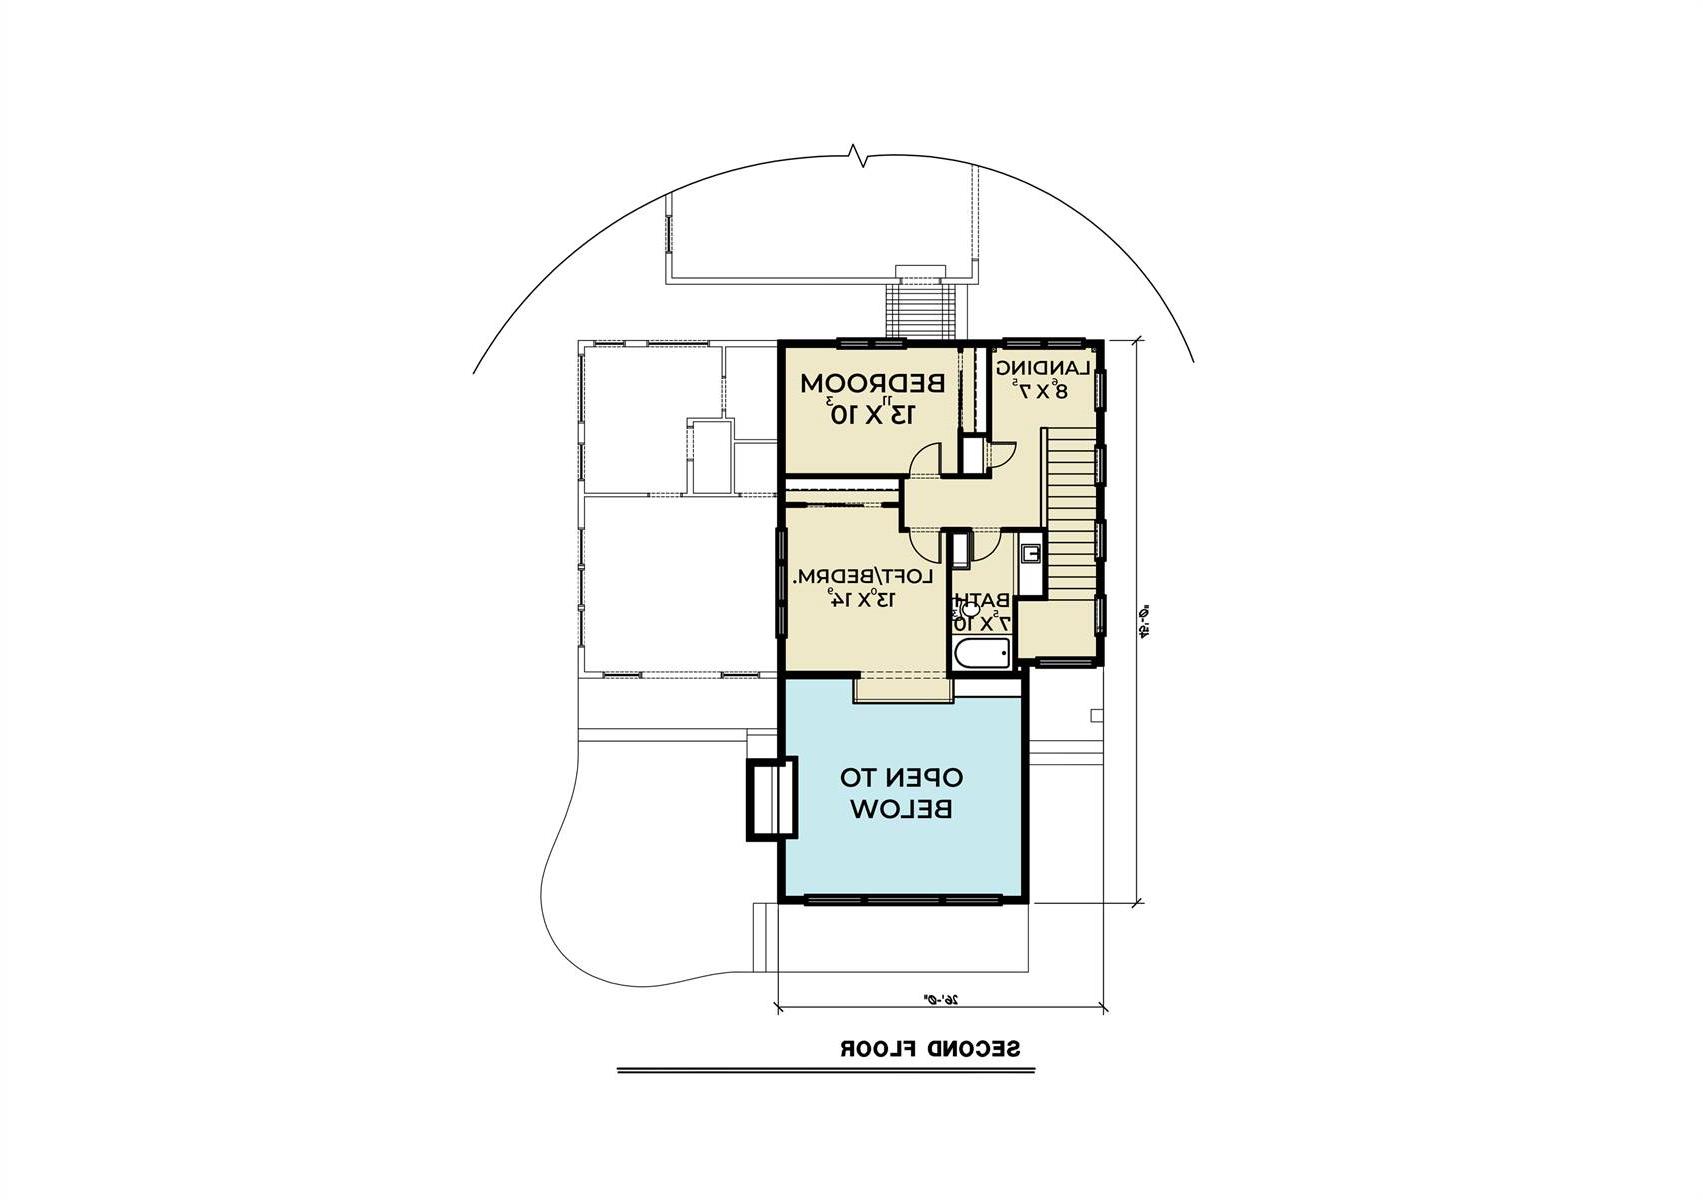 2nd Floor image of Contemporary 201 House Plan